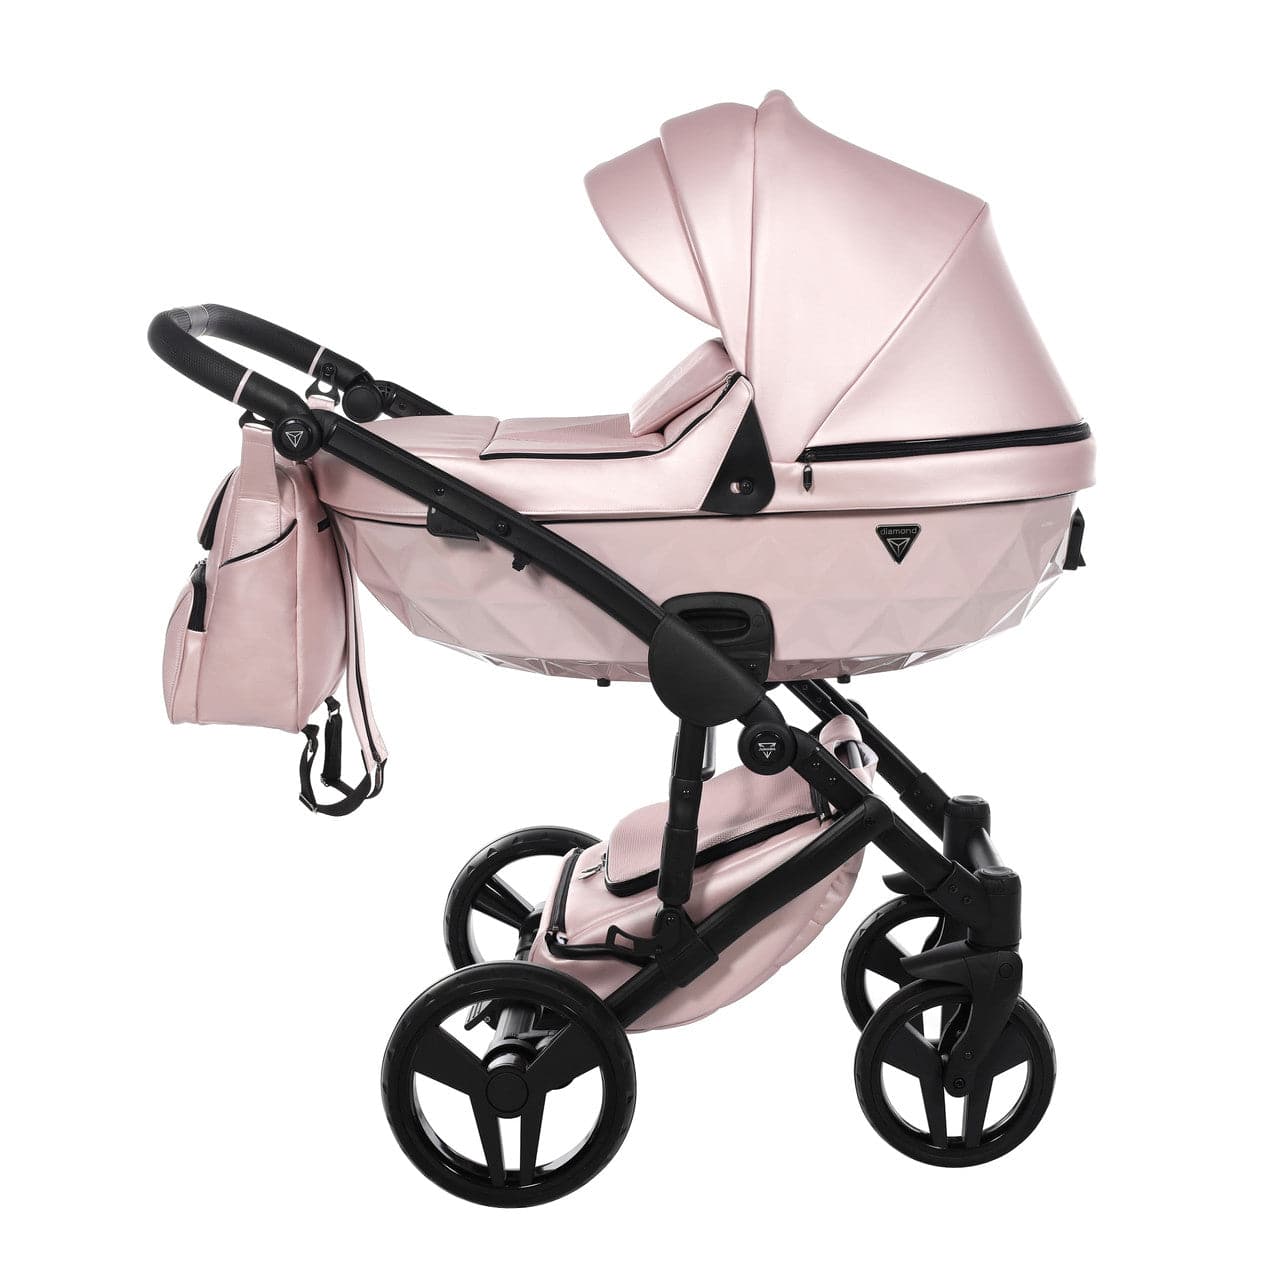 Junama S-Class 2 In 1 Pram - Pink - For Your Little One